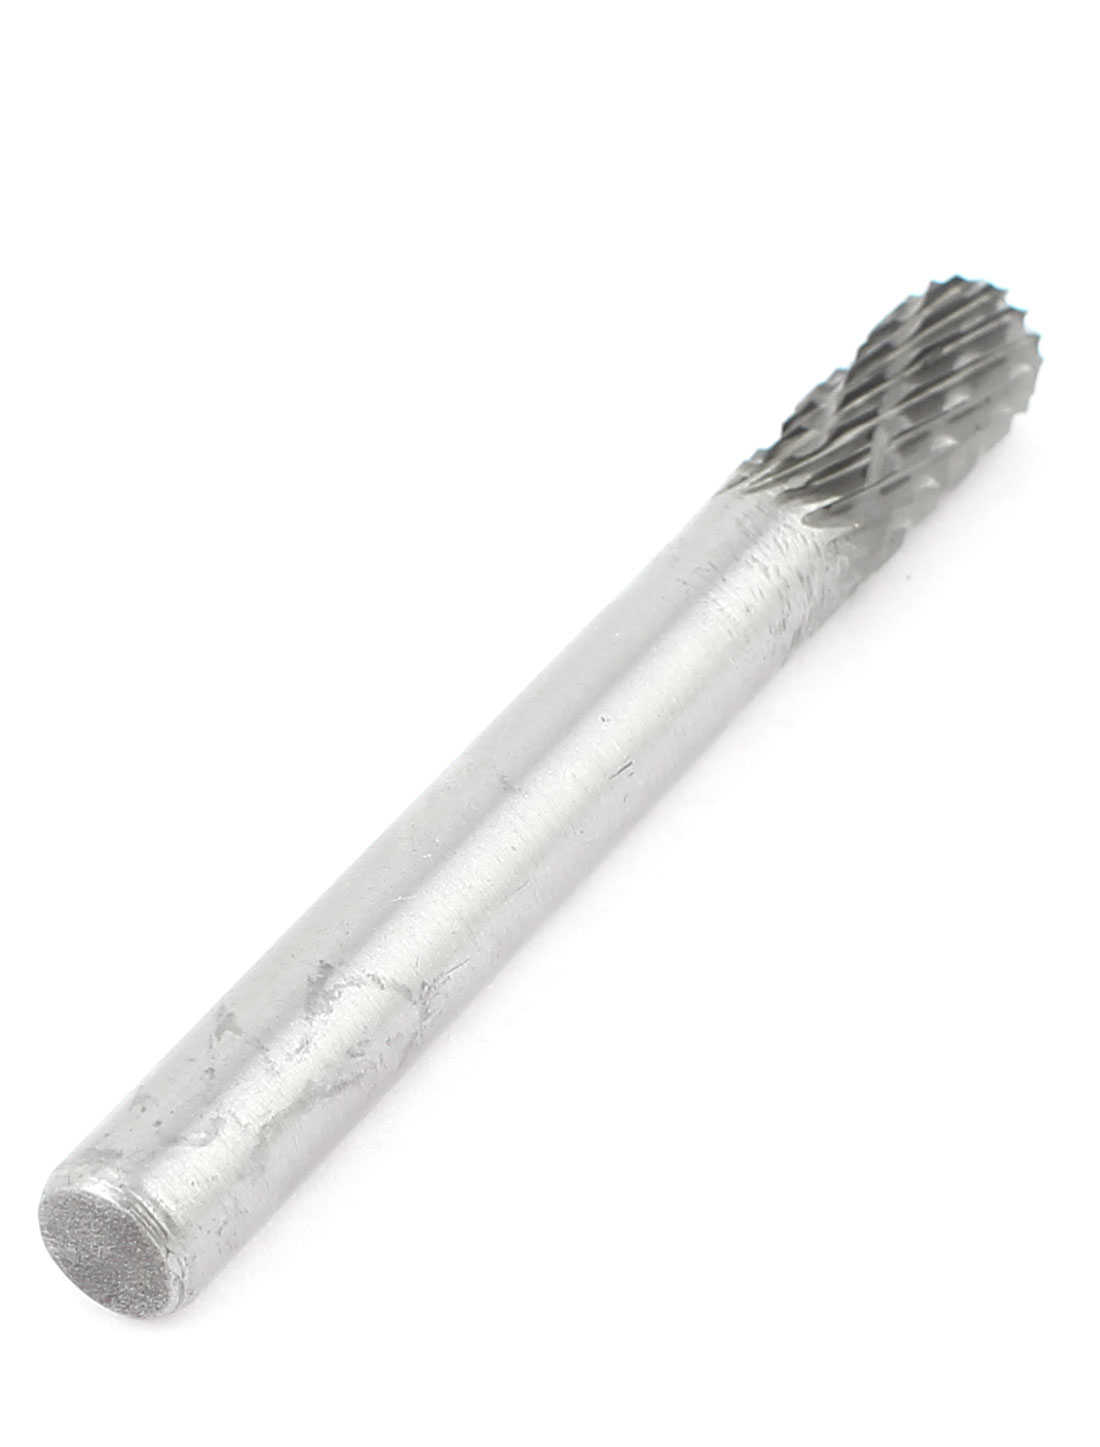 Unique Bargains Cylinder Ball Grinding Carving Carbide Rotary File 8mm x 20mm